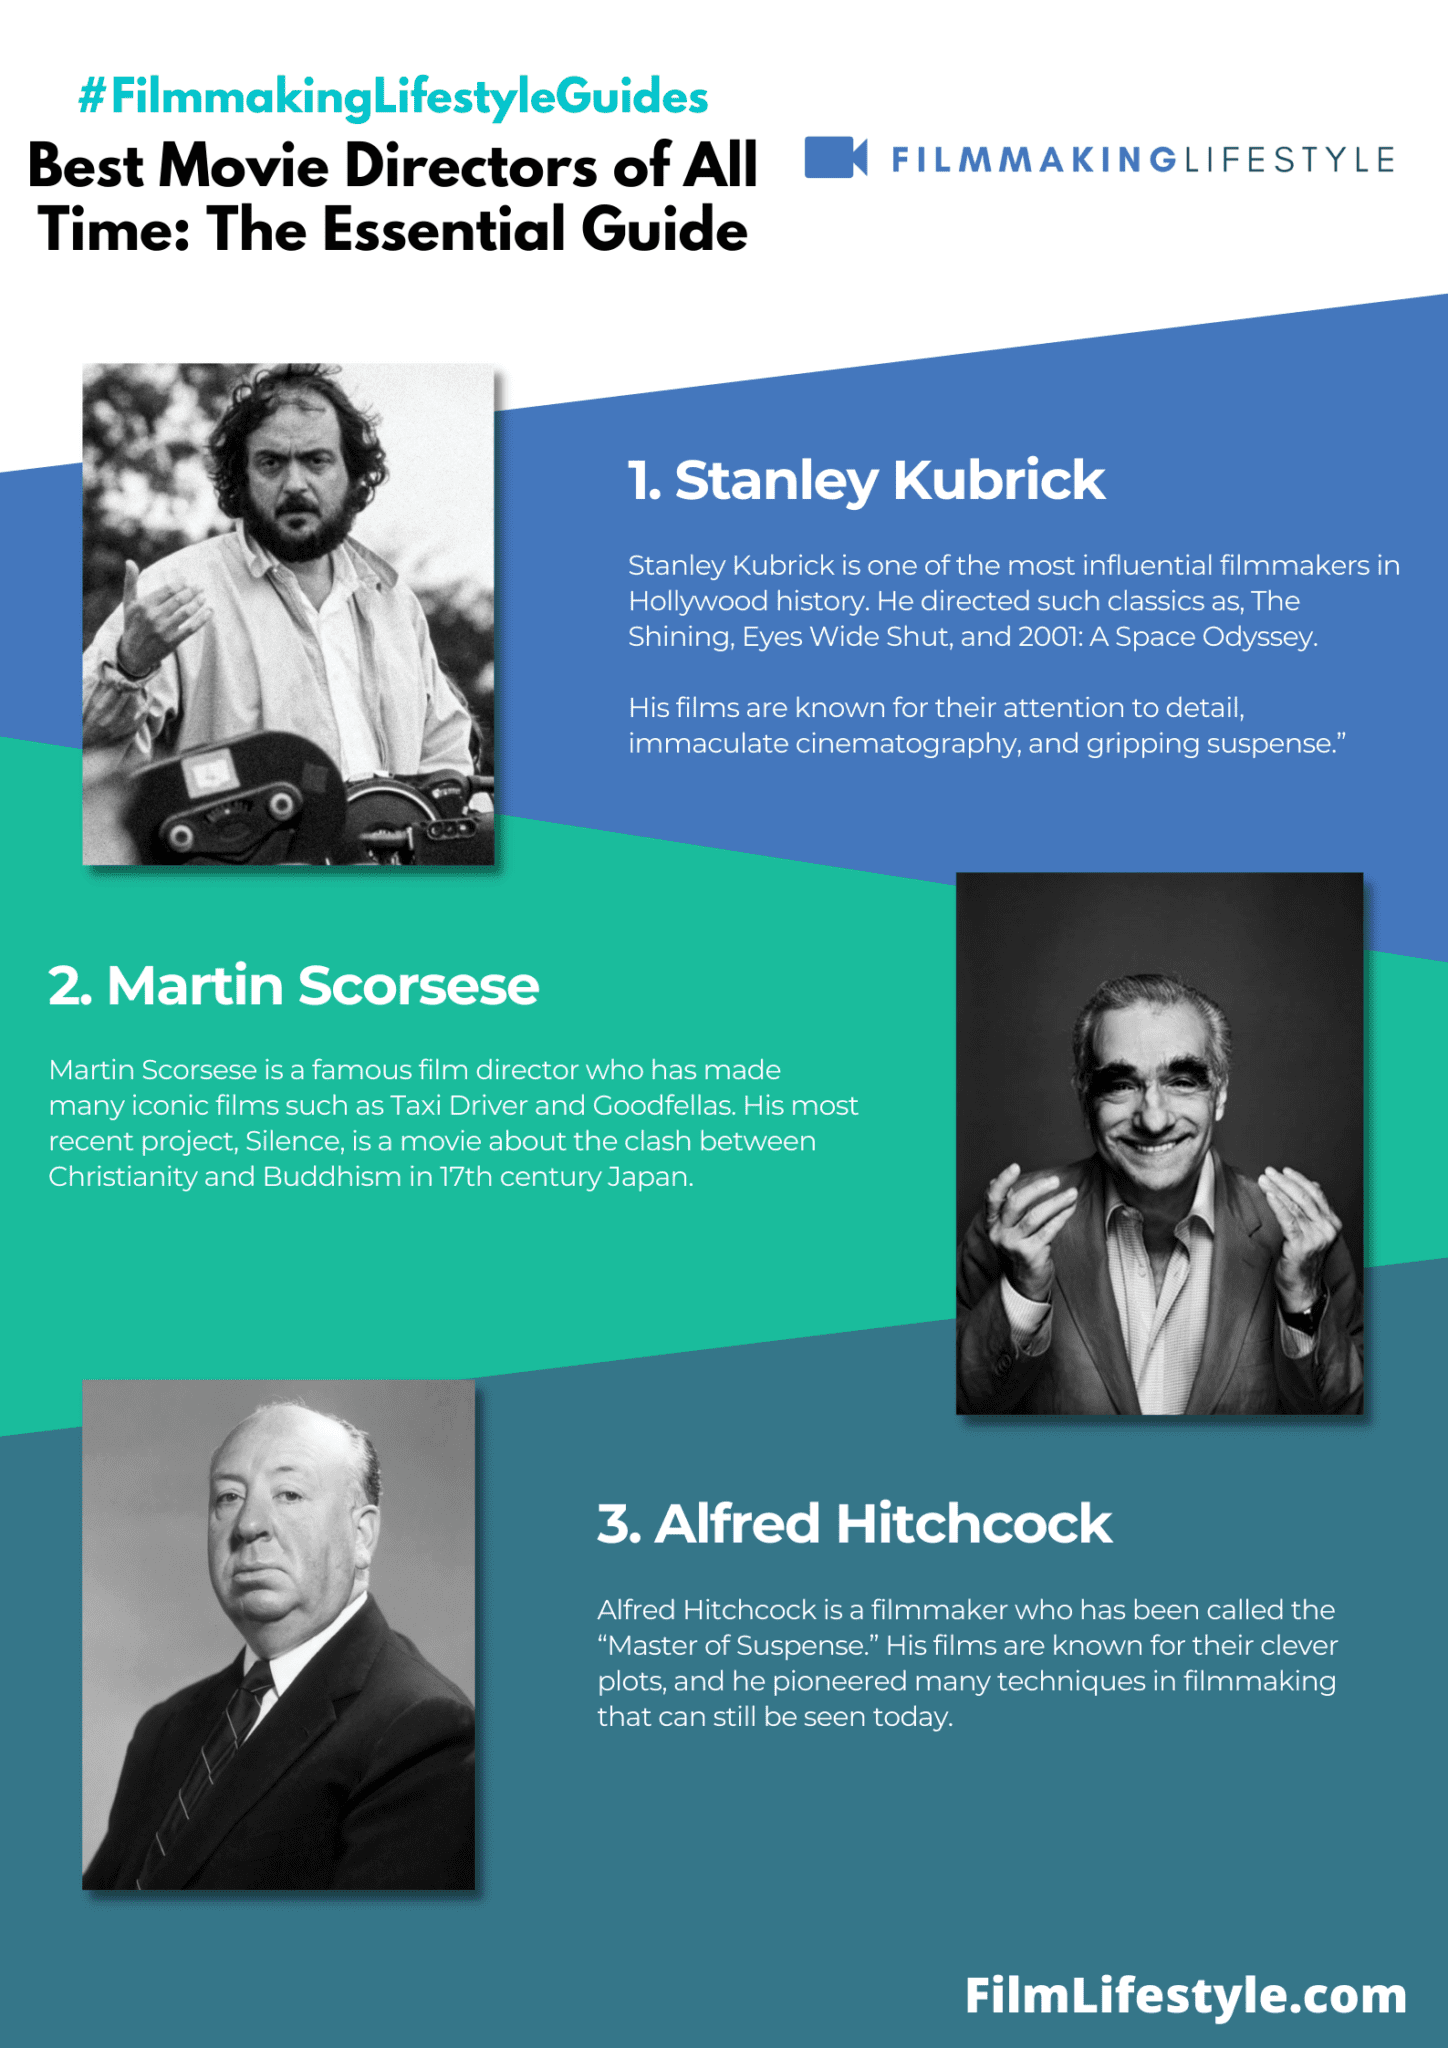 Best Movie Directors of All Time